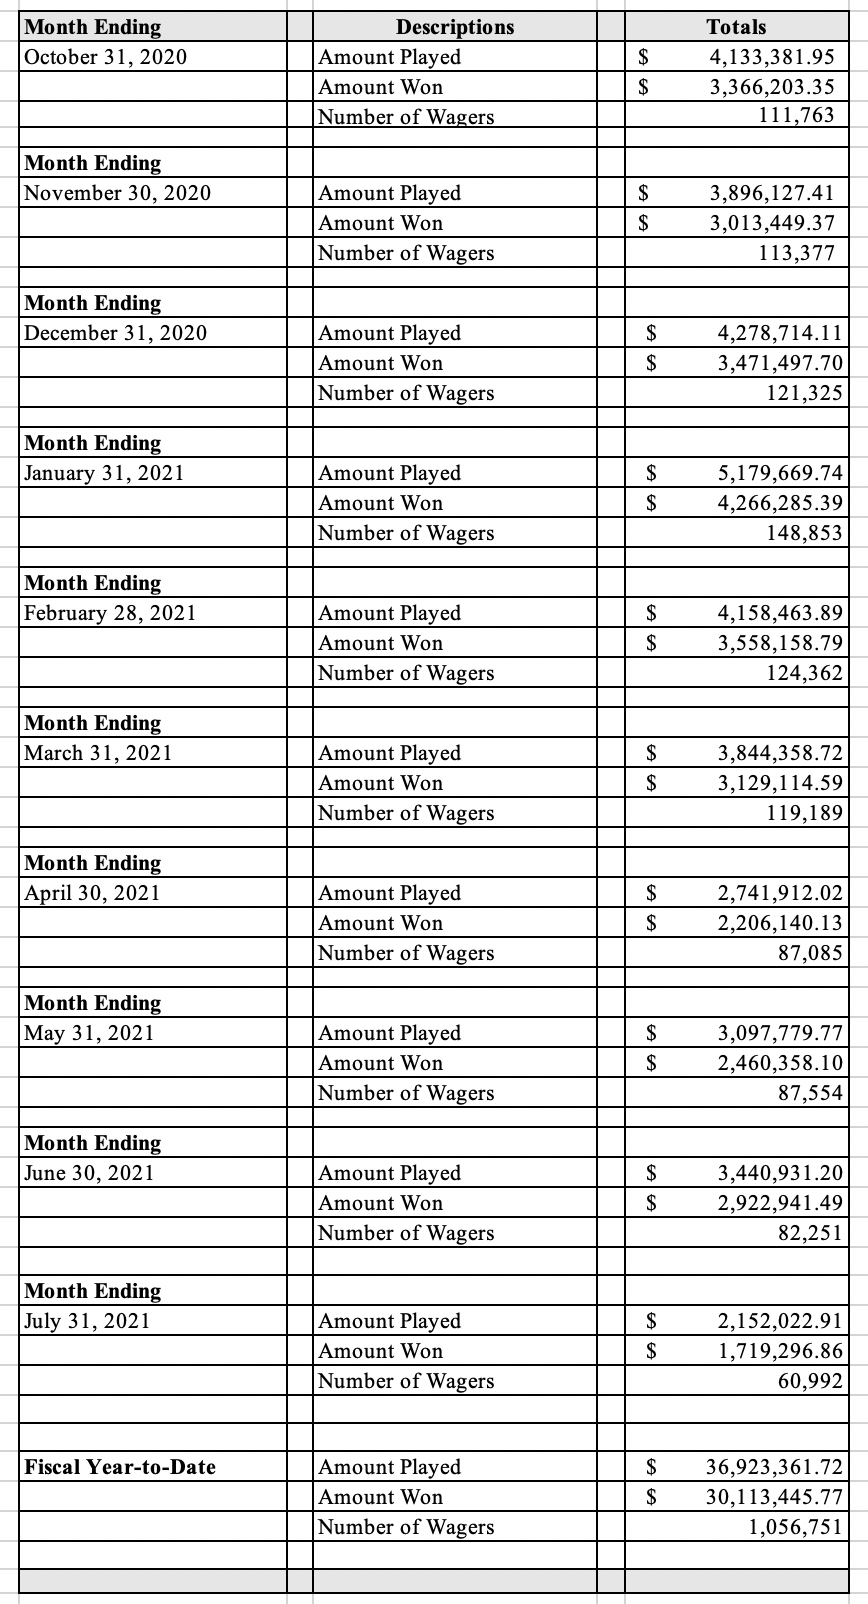 Table displaying the July 2021 Sports Wagering monthly revenue totals